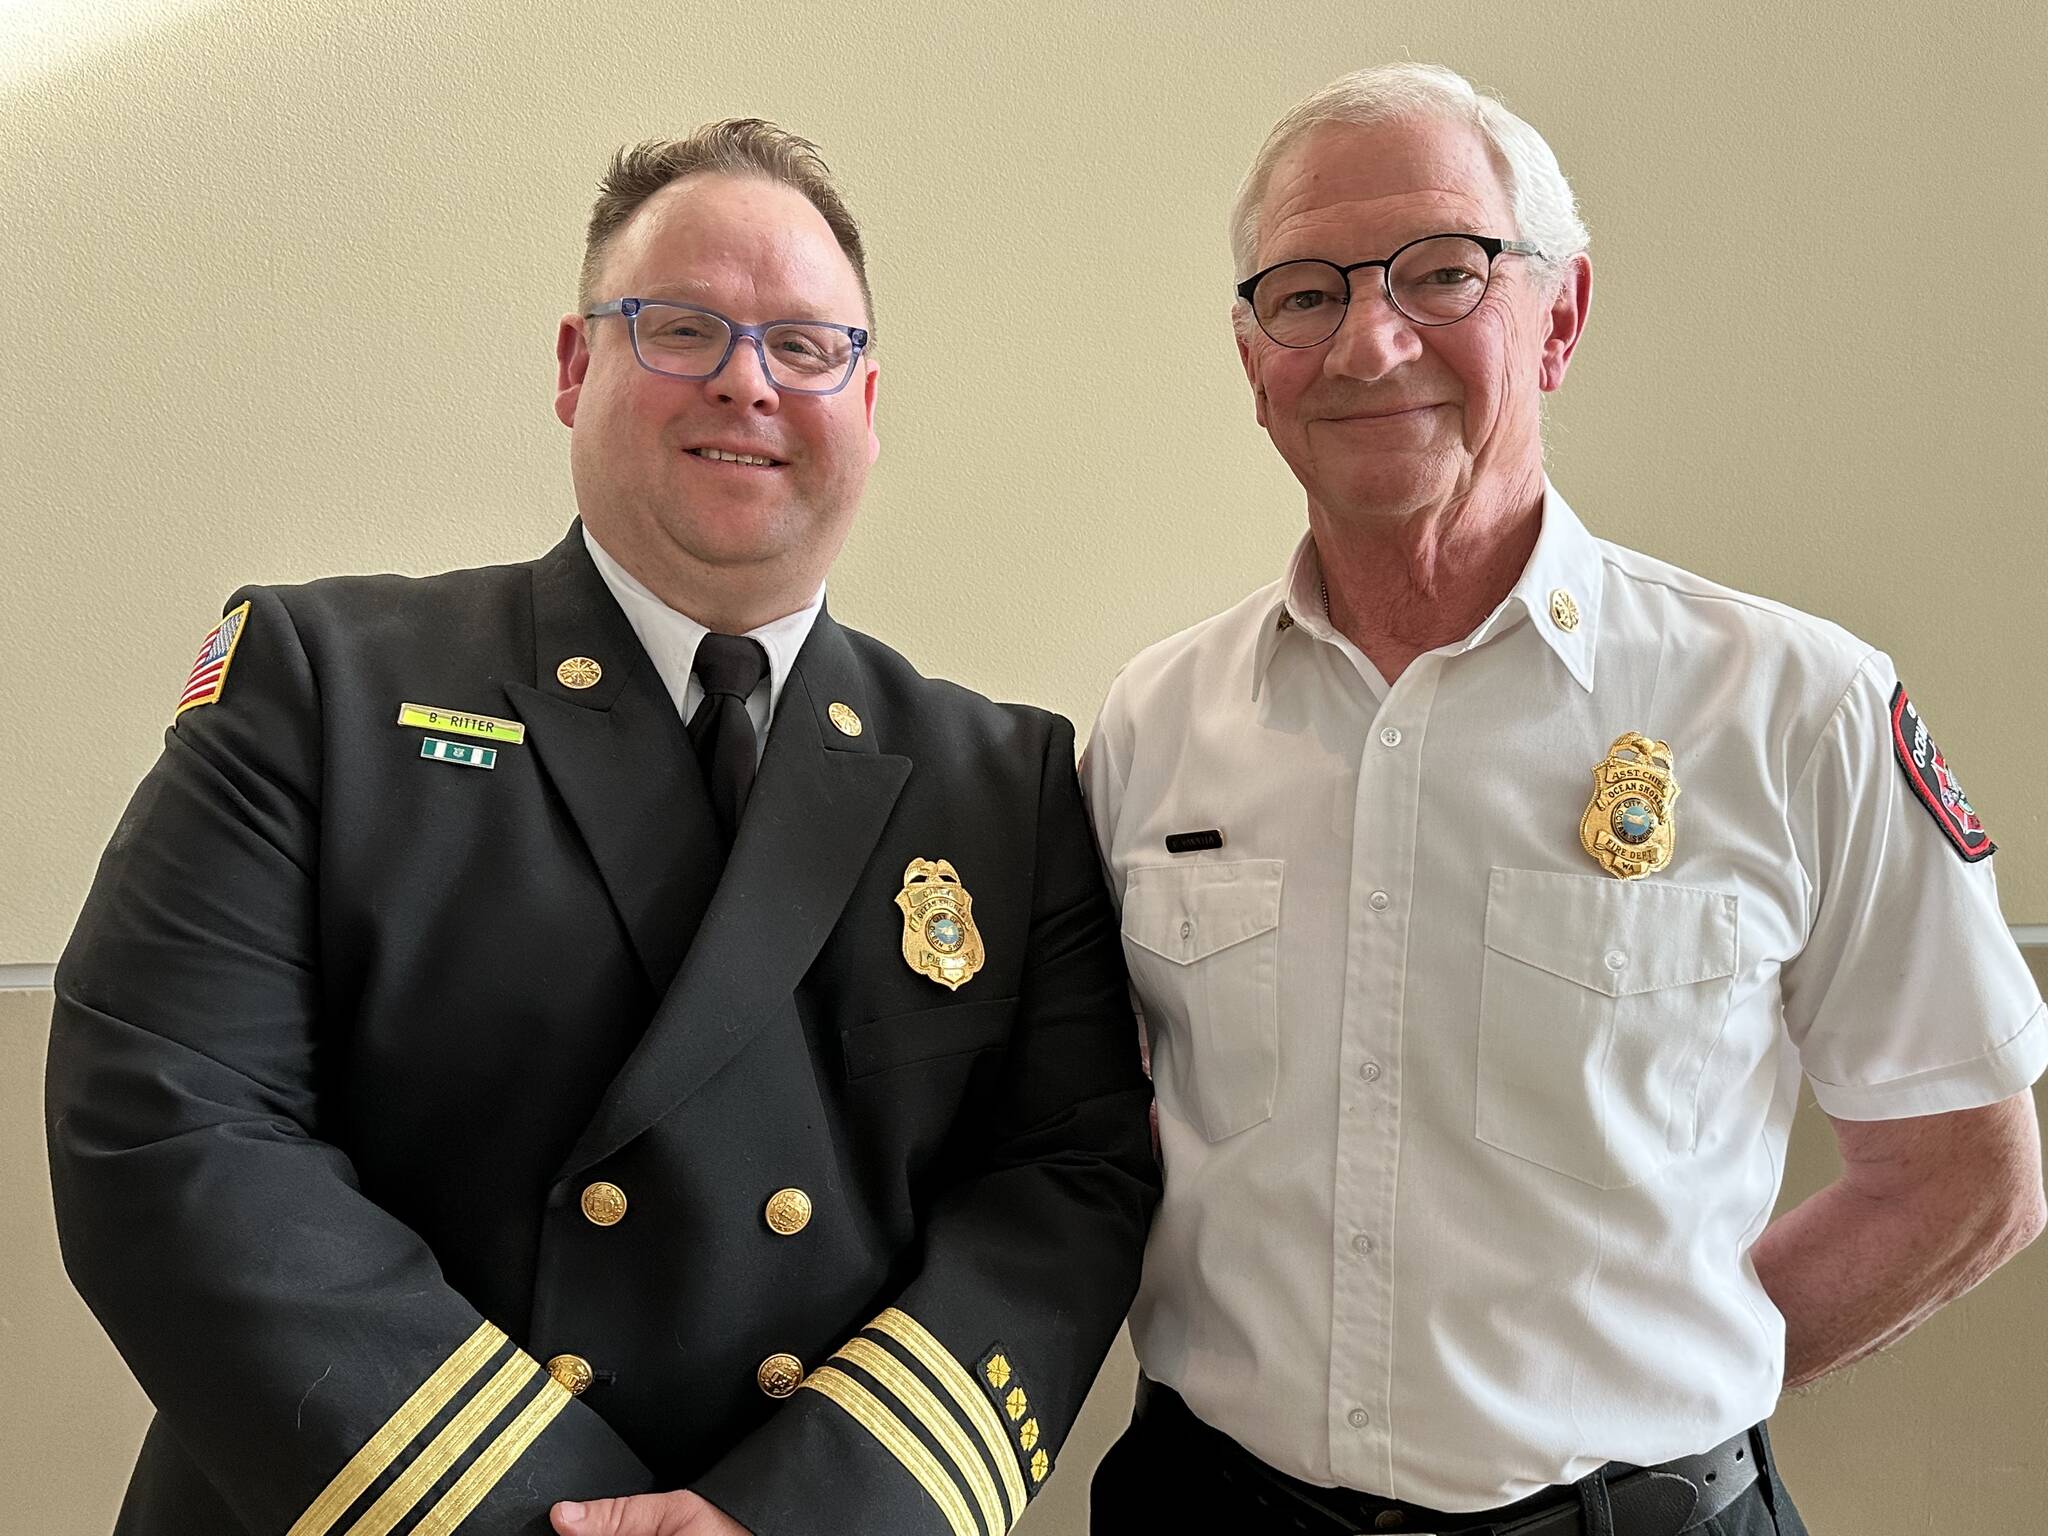 Courtesy photo / OSFD
Ocean Shores Fire Chief Brian Ritter, confirmed during a city council meeting Monday night, poses with Mike Mandella, who came on as the assistant chief.